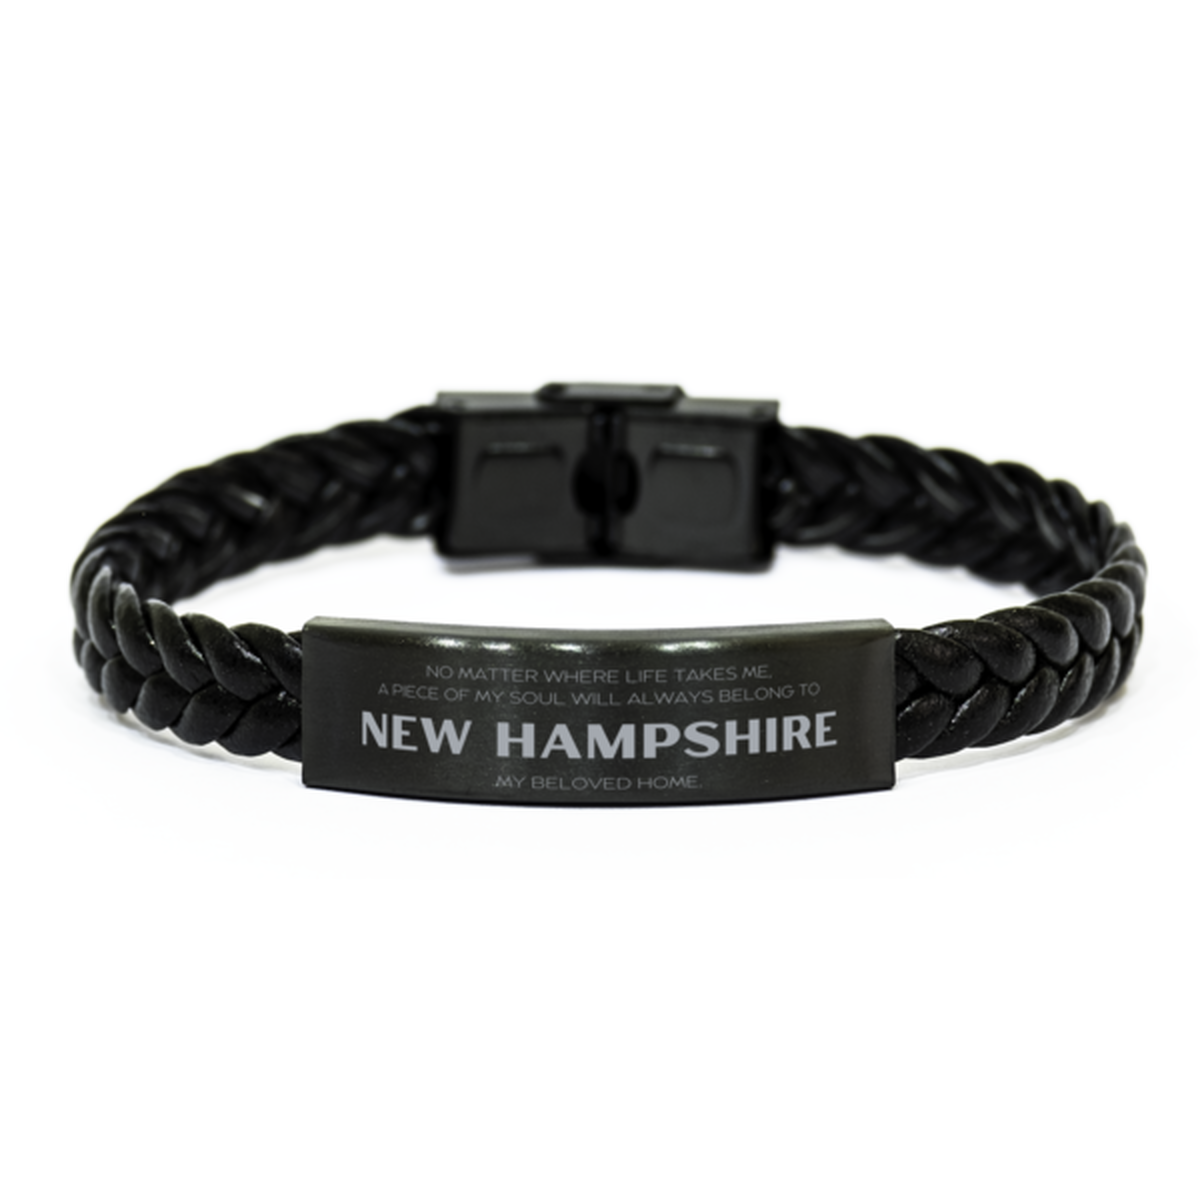 Love New Hampshire State Gifts, My soul will always belong to New Hampshire, Proud Braided Leather Bracelet, Birthday Unique Gifts For New Hampshire Men, Women, Friends